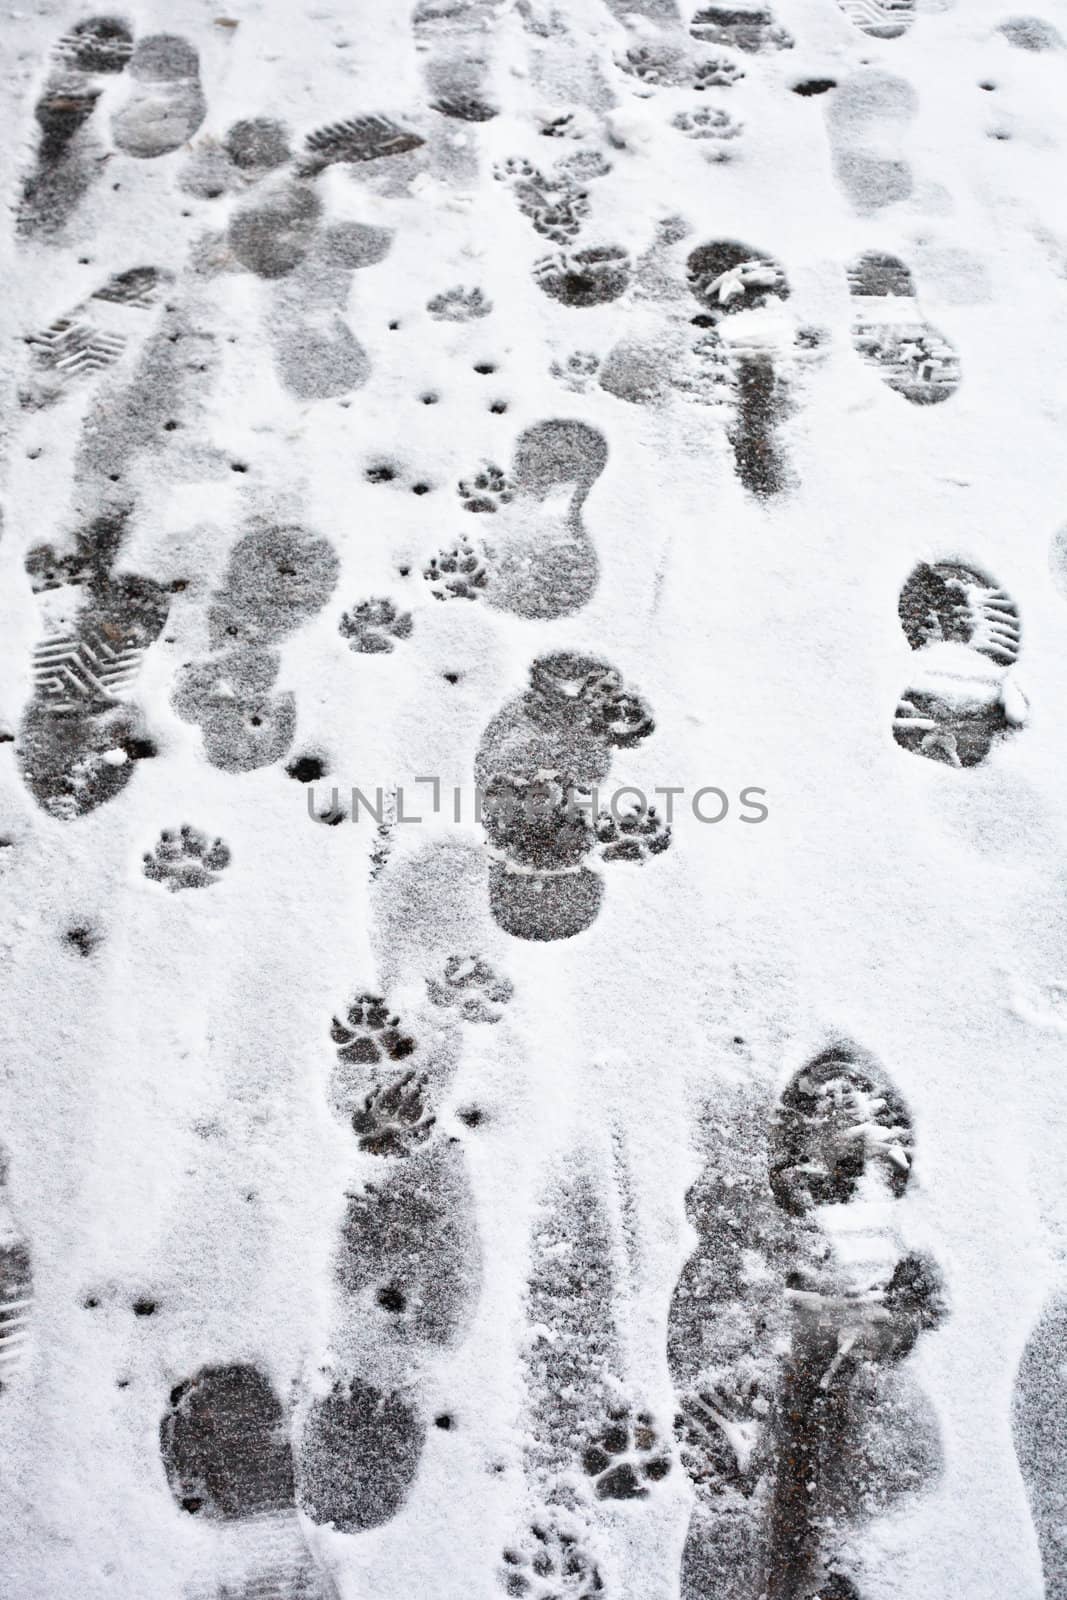 Many footprints and pawprints in the snow